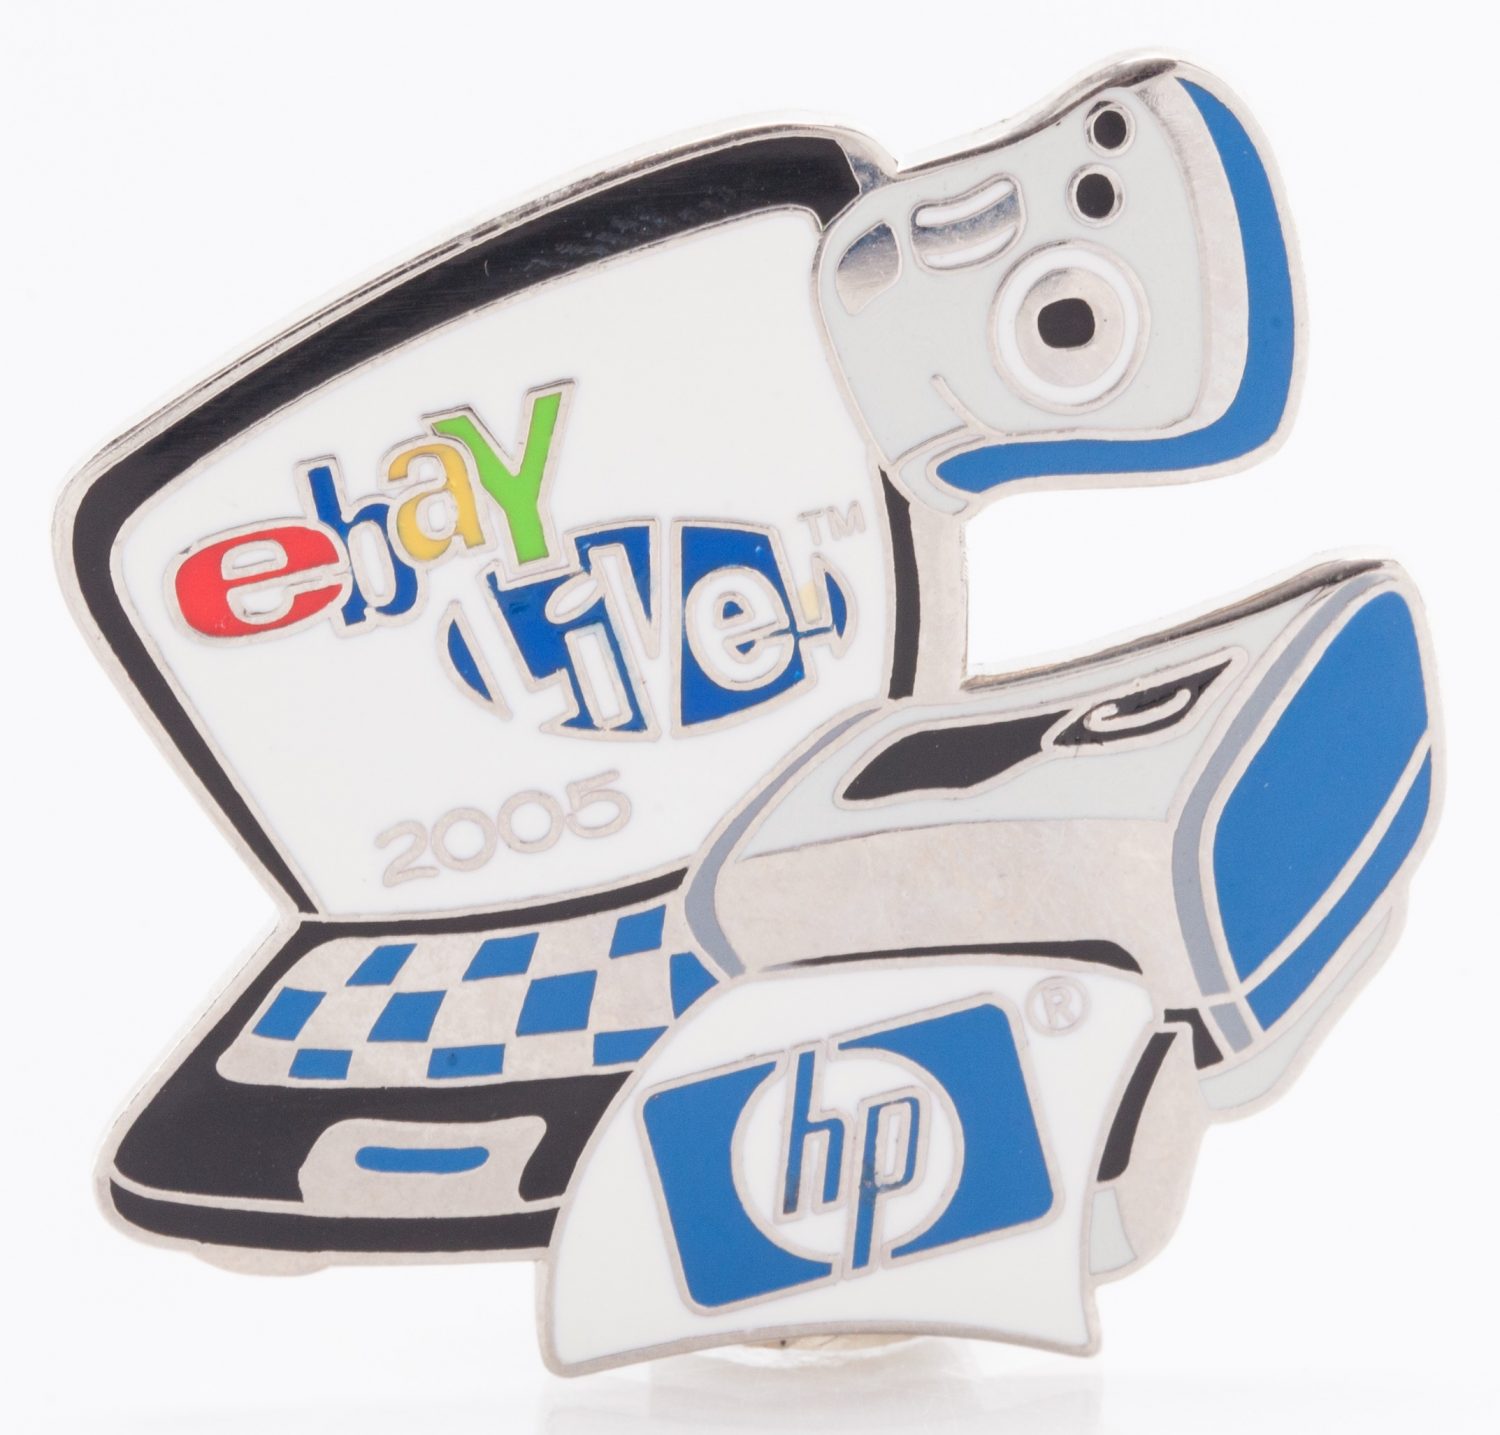 A pin celebrating HP's sponsorship of eBay Live! in 2005, featuring a laptop, printer and camera.